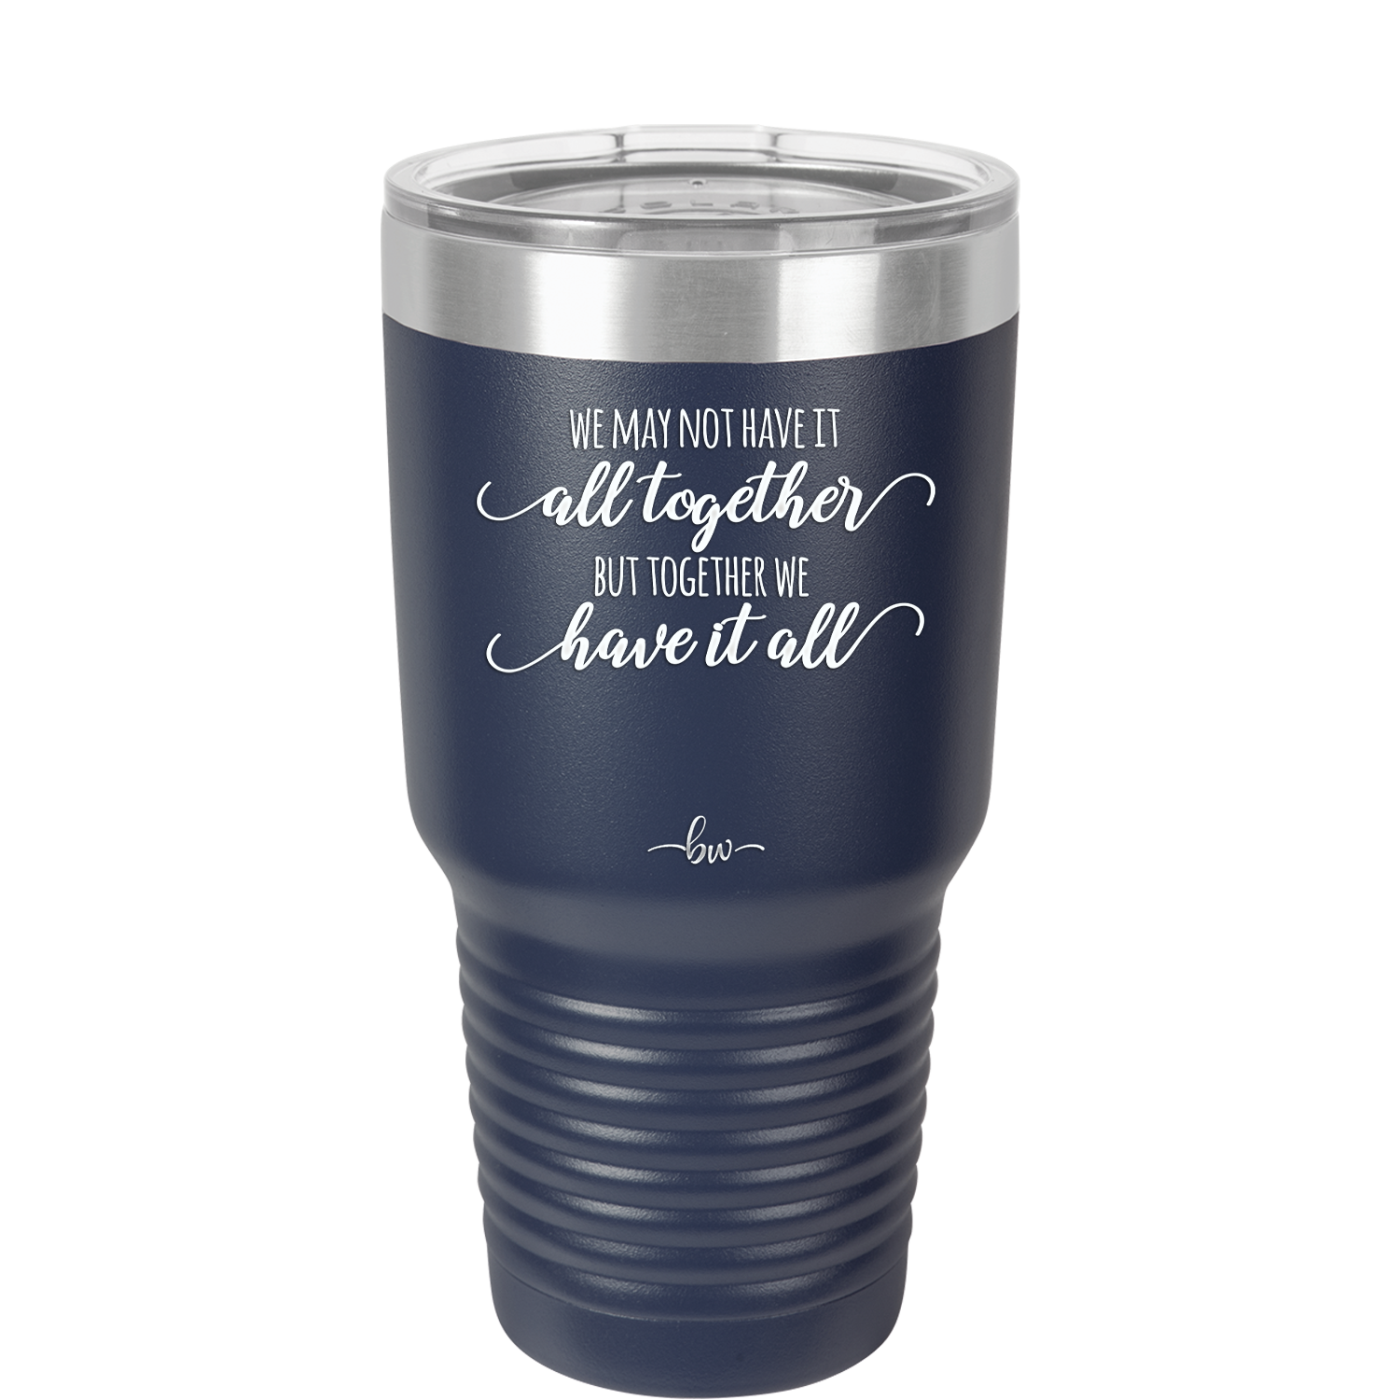 We May Not Have it All Together But Together We Have it All - Laser Engraved Stainless Steel Drinkware - 2014 -